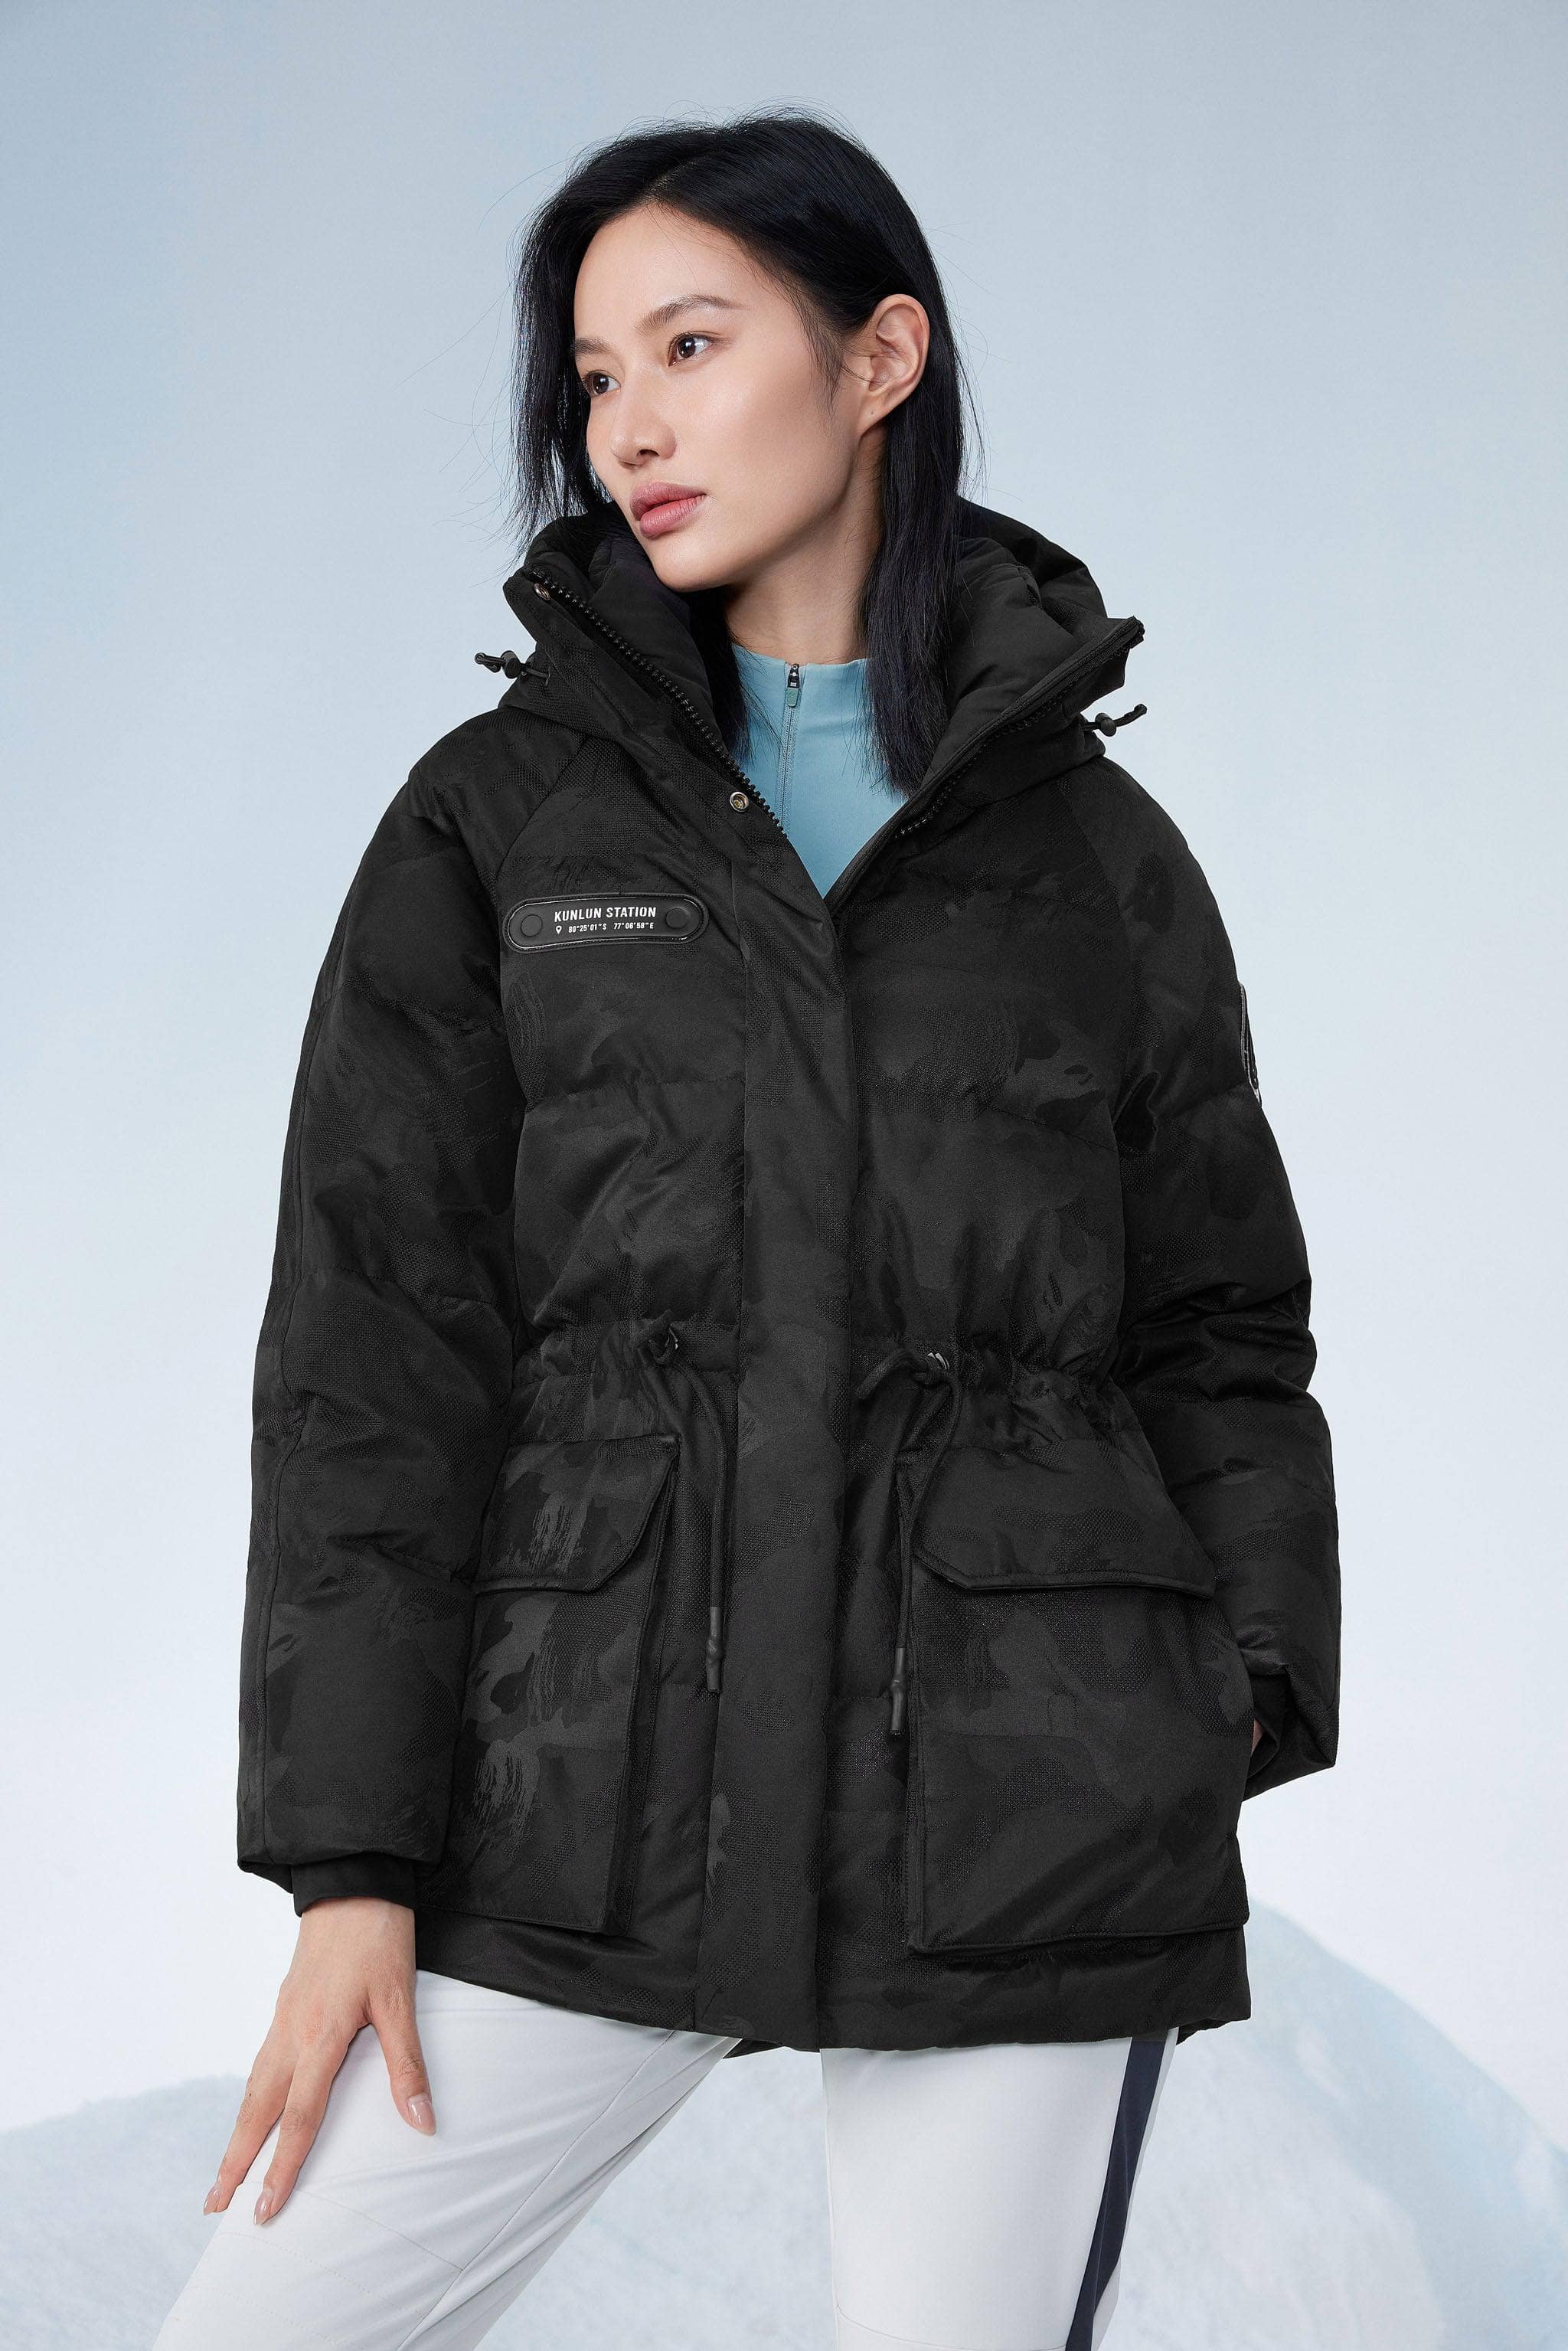 Women's Classic Extreme Goose Down Jacket 2302